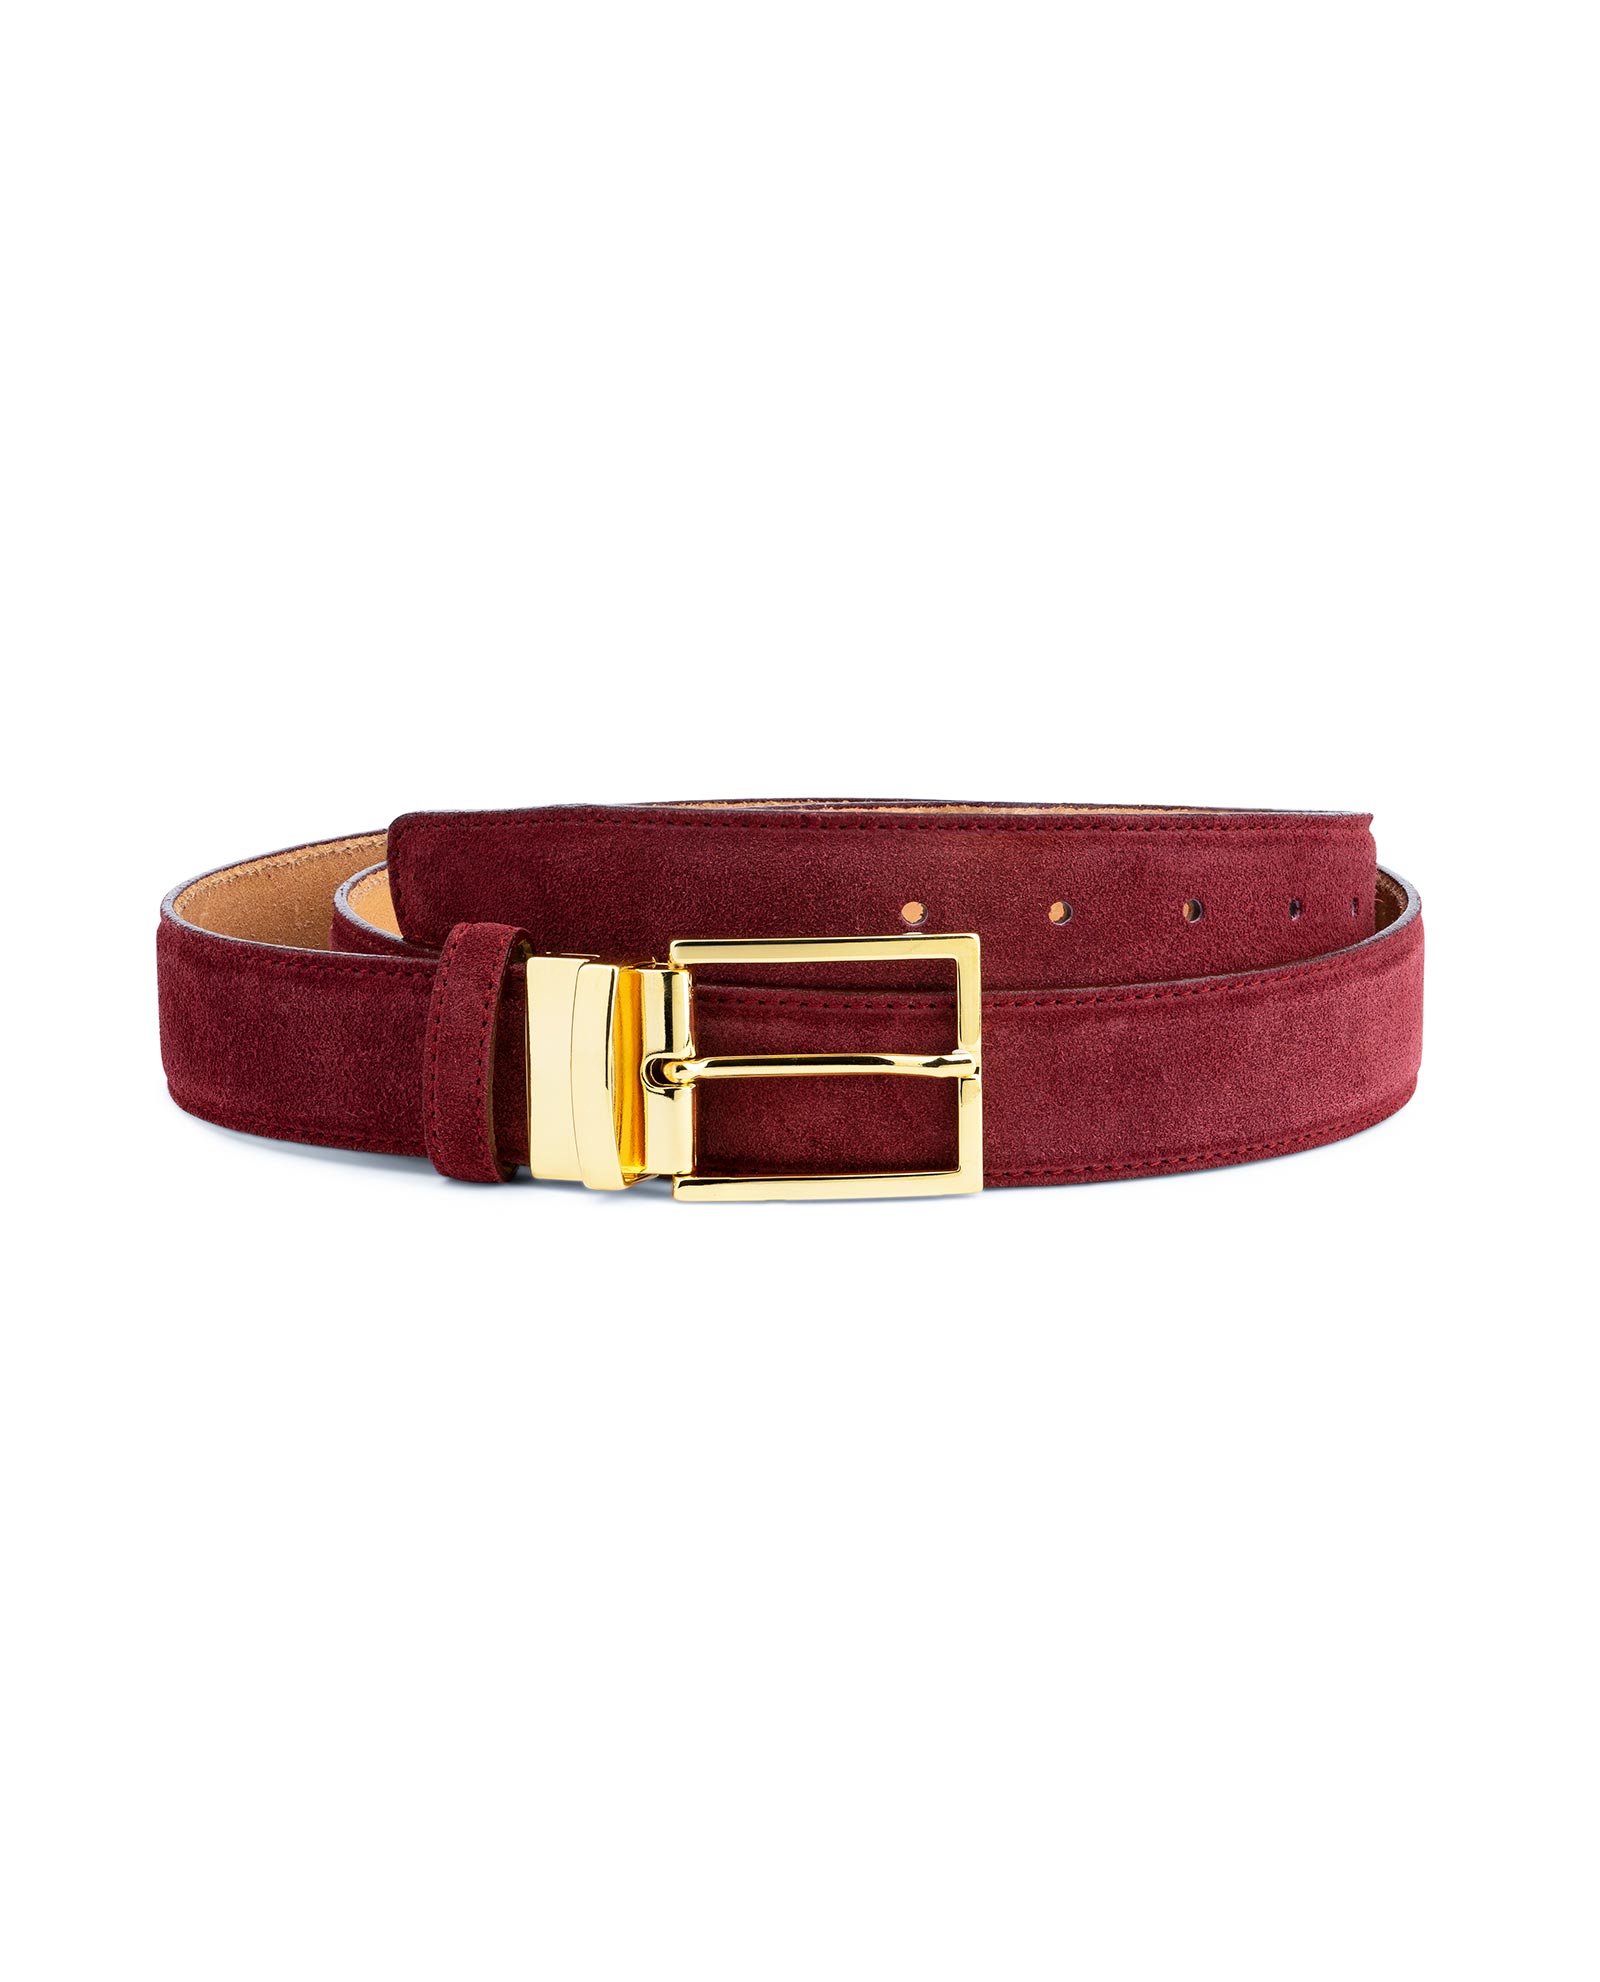 Burgundy Belt Soft Italian leather belts for Men by Capo Pelle Casual Limited